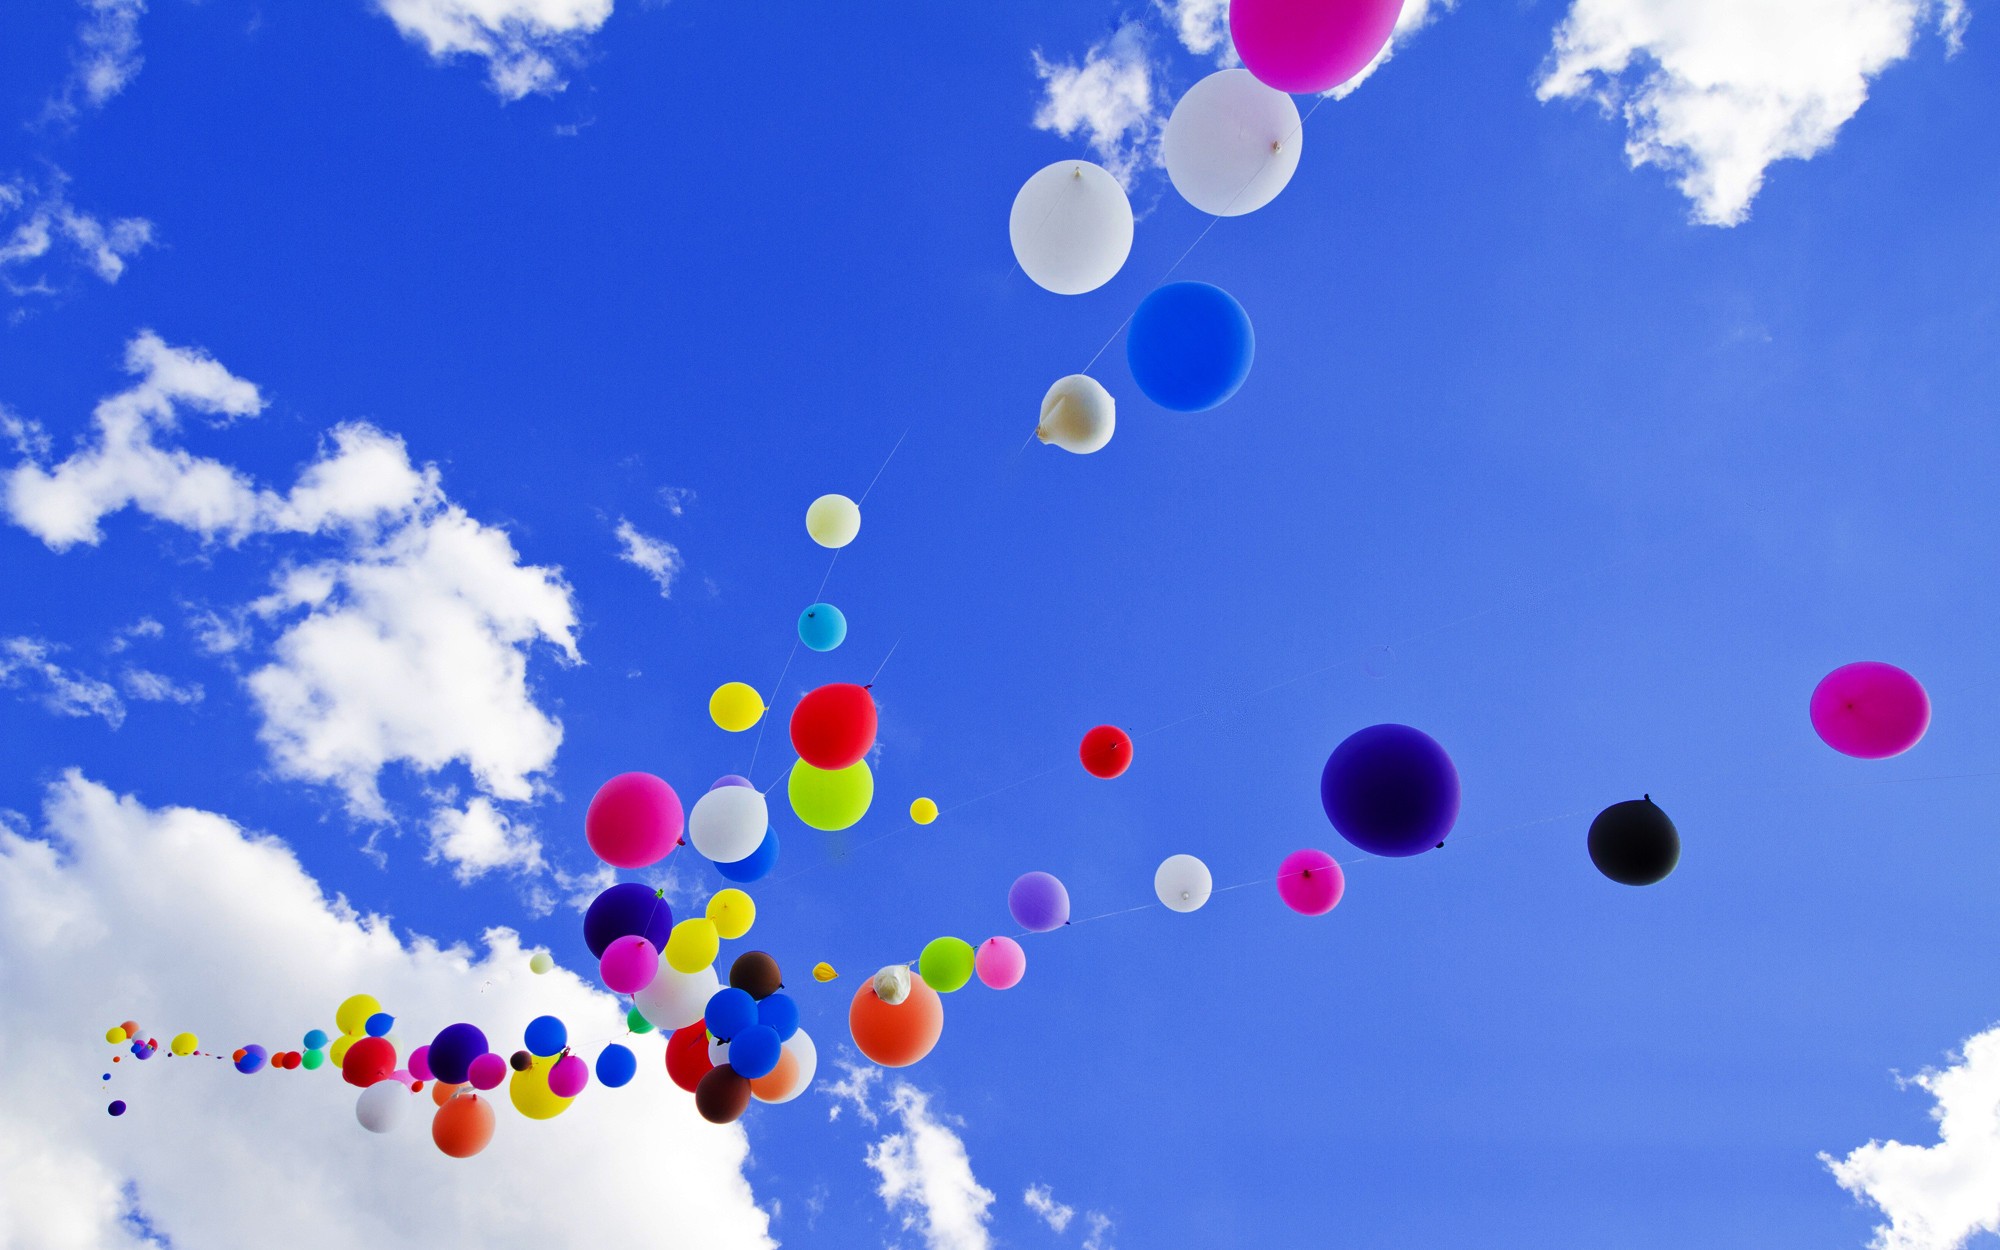 colorful balloons Wallpaper Background 38328